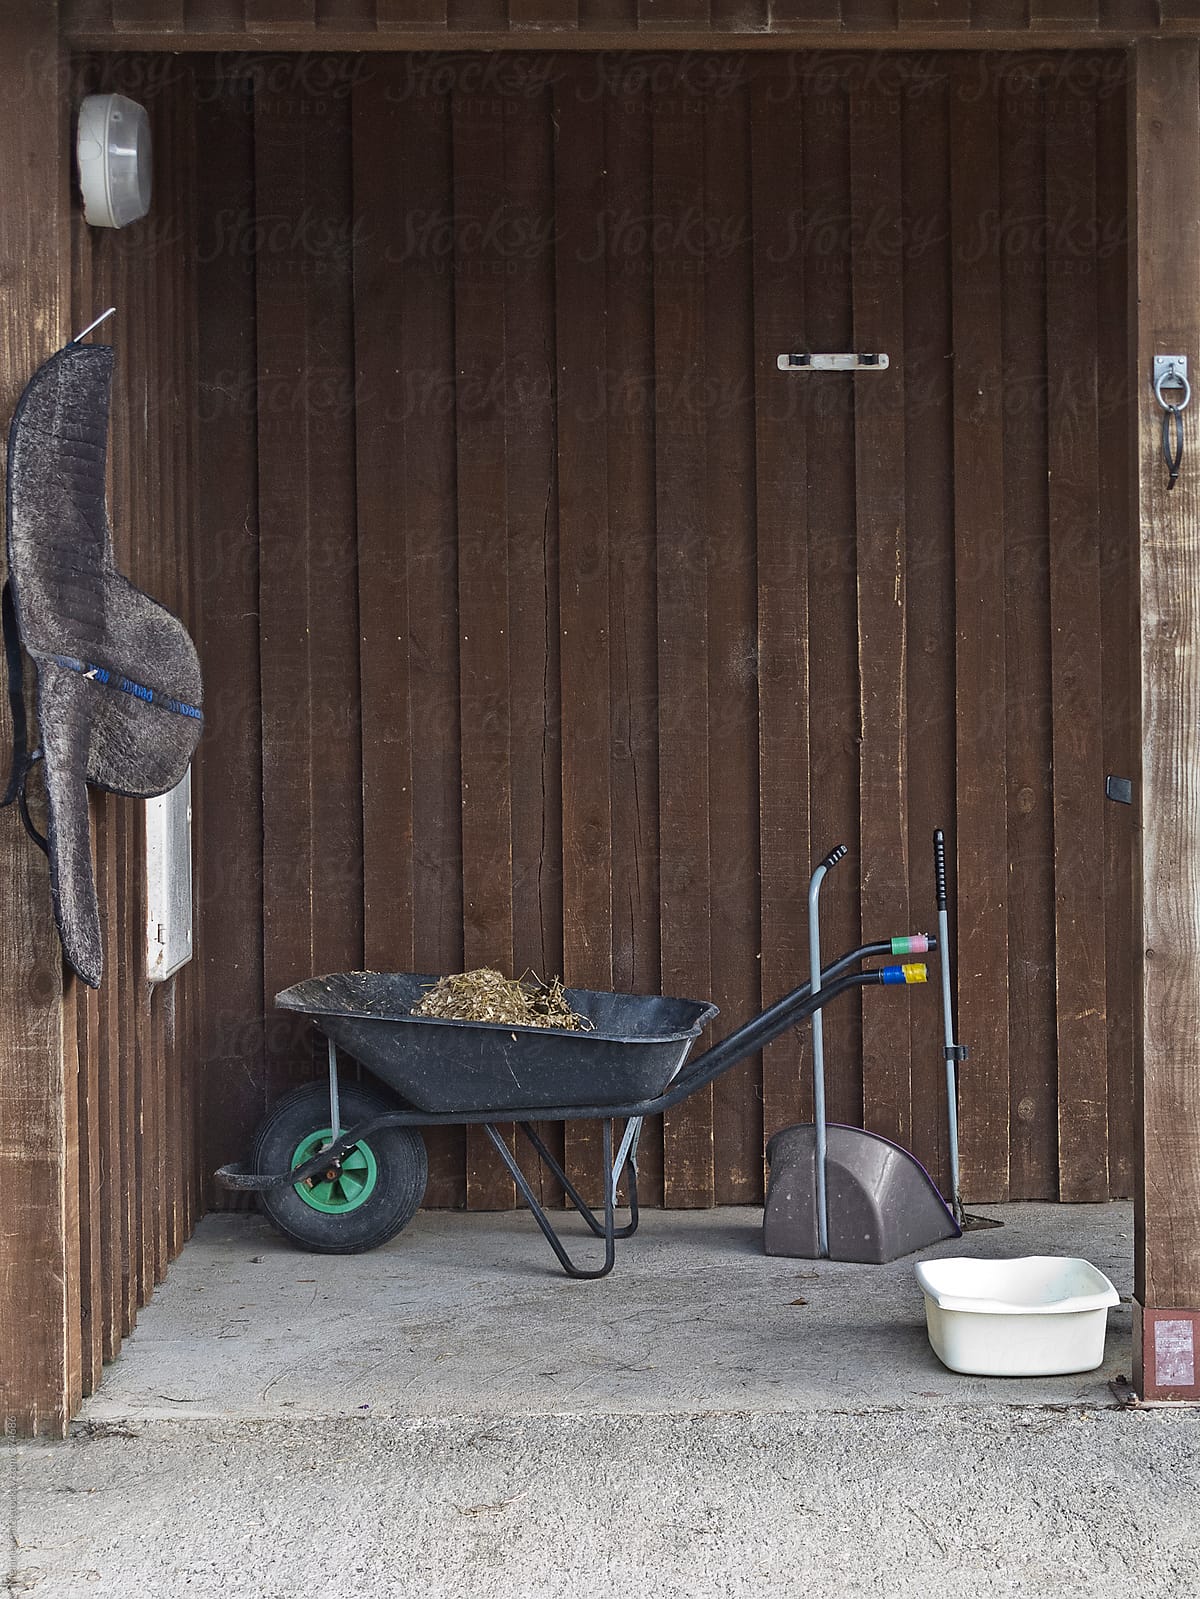 Objects outside a horse stable